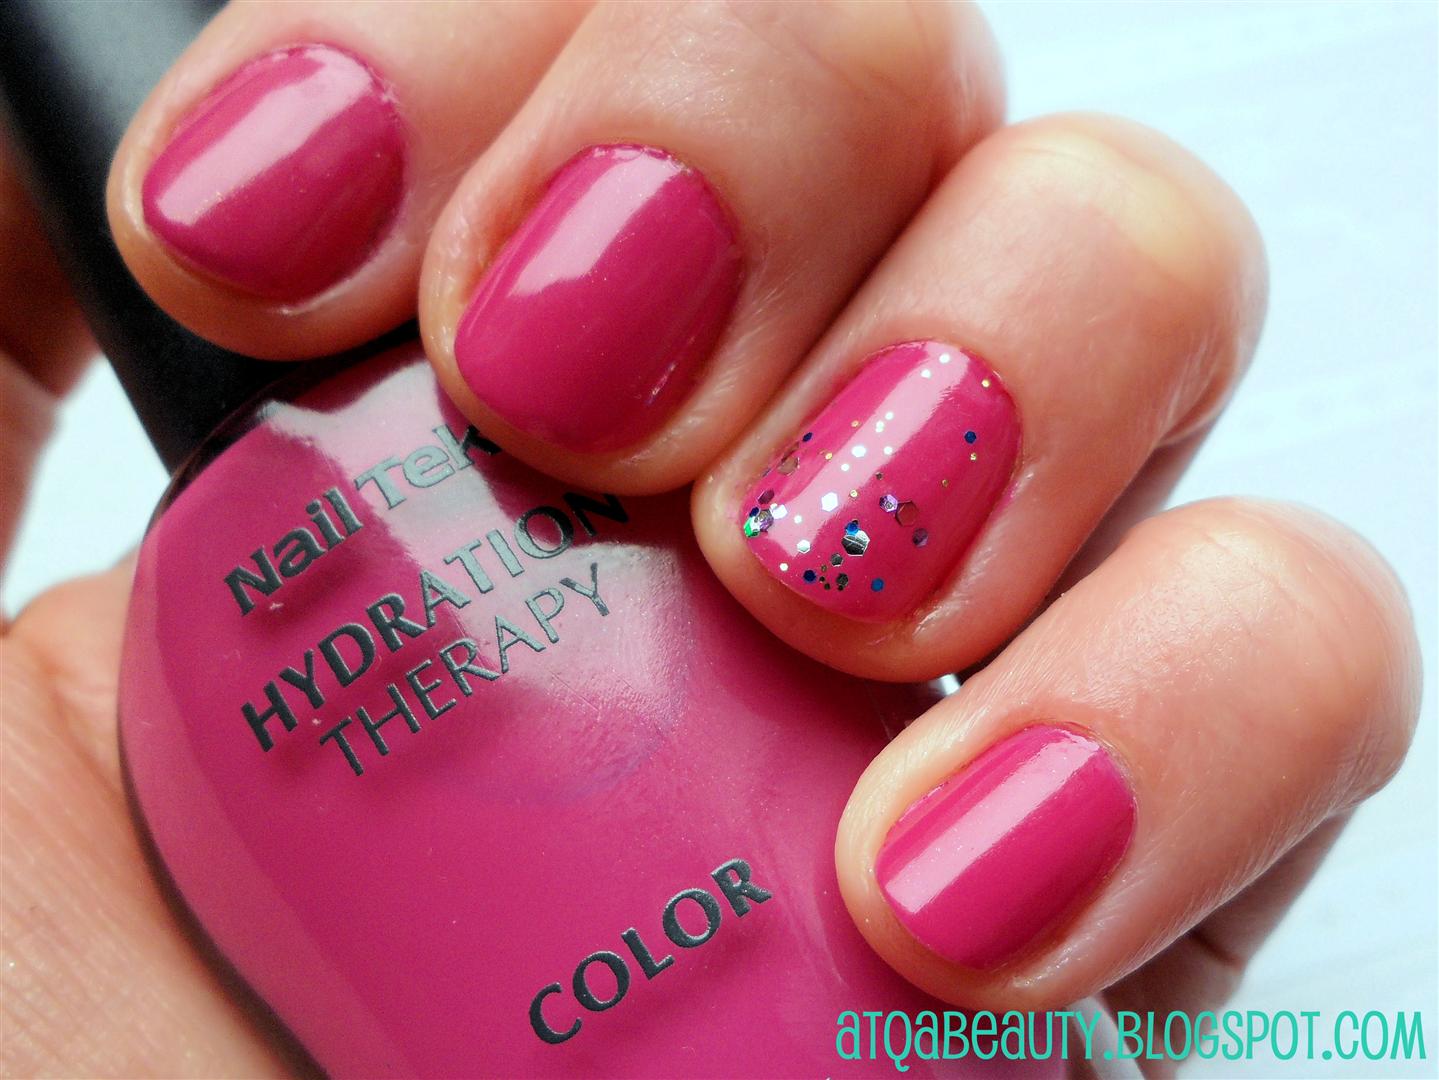 Paznokcie :: Nail Tek Hydration Therapy Color, Dose-A-Rosa